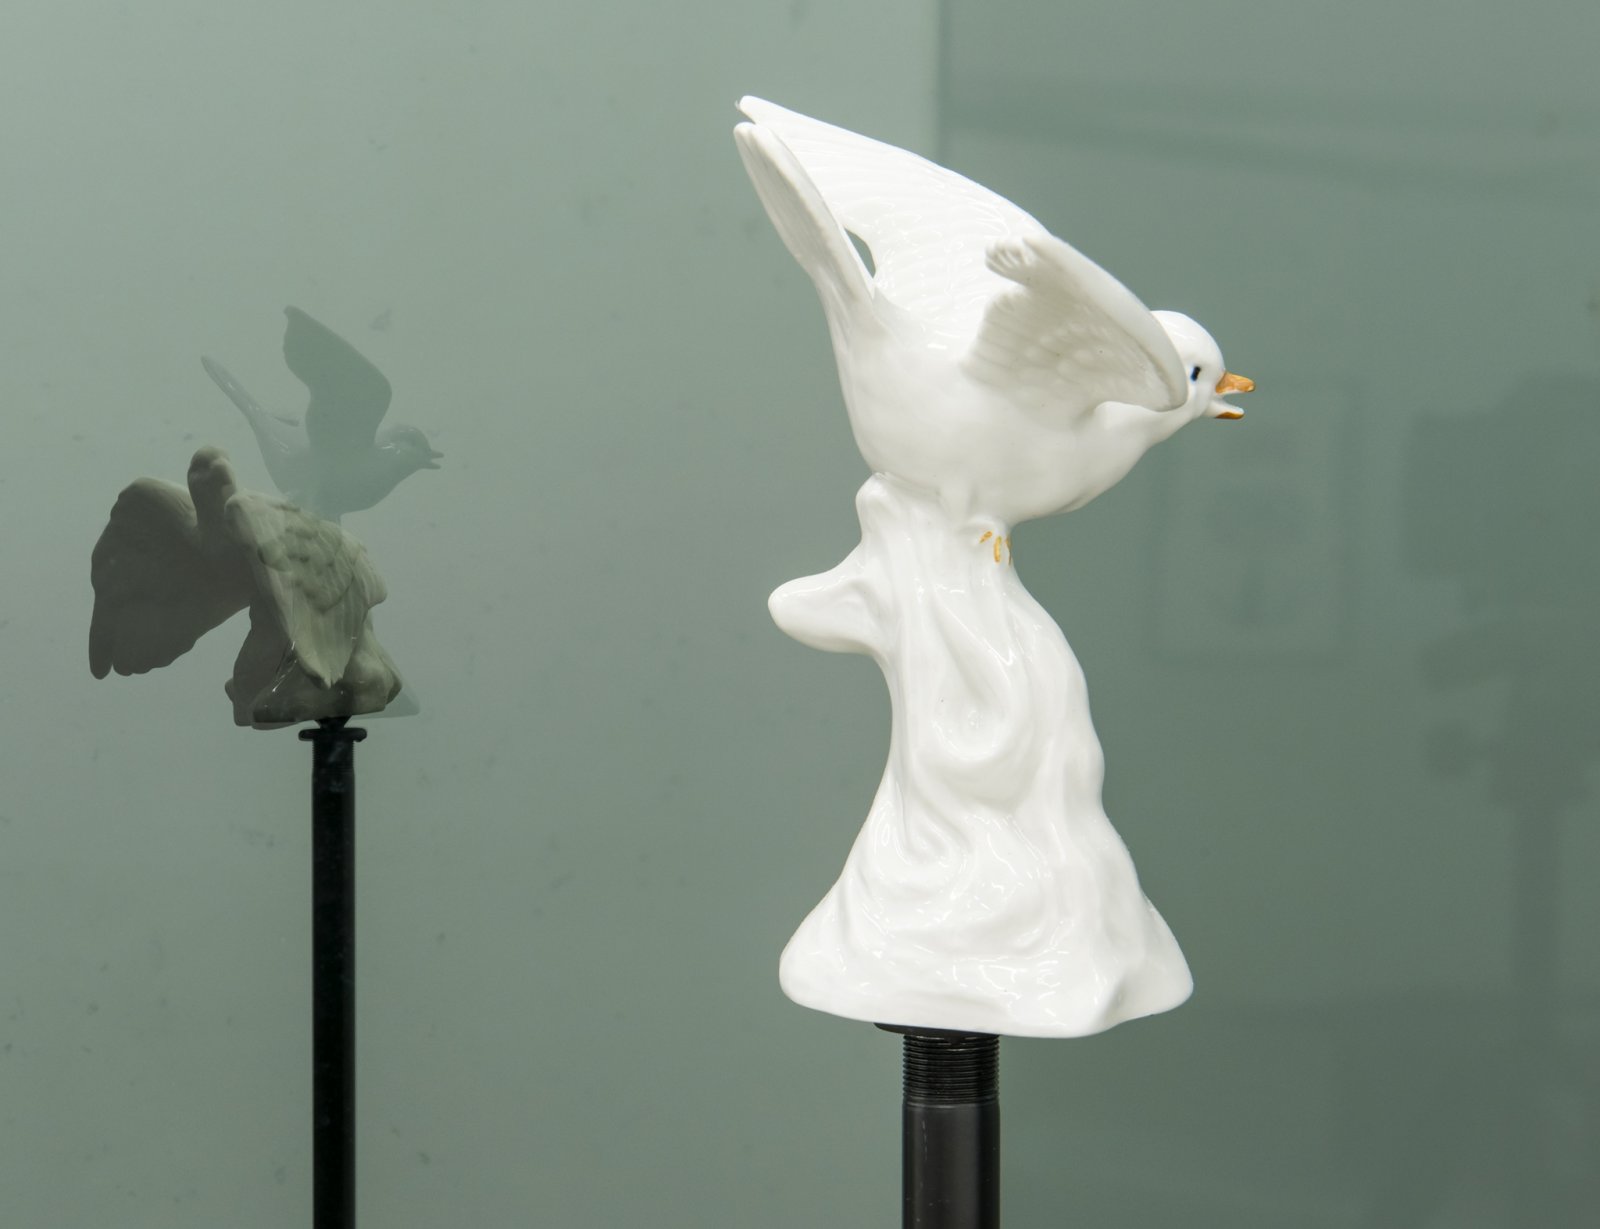 ​​Judy Radul, Connector Divider (Hawks, Sparrows, Pigeons, Doves, Ducks, Eagles) (detail), 2018, salvaged glass, aluminum, found ceramic figurines, microphone stands, dimensions variable​ by Judy Radul